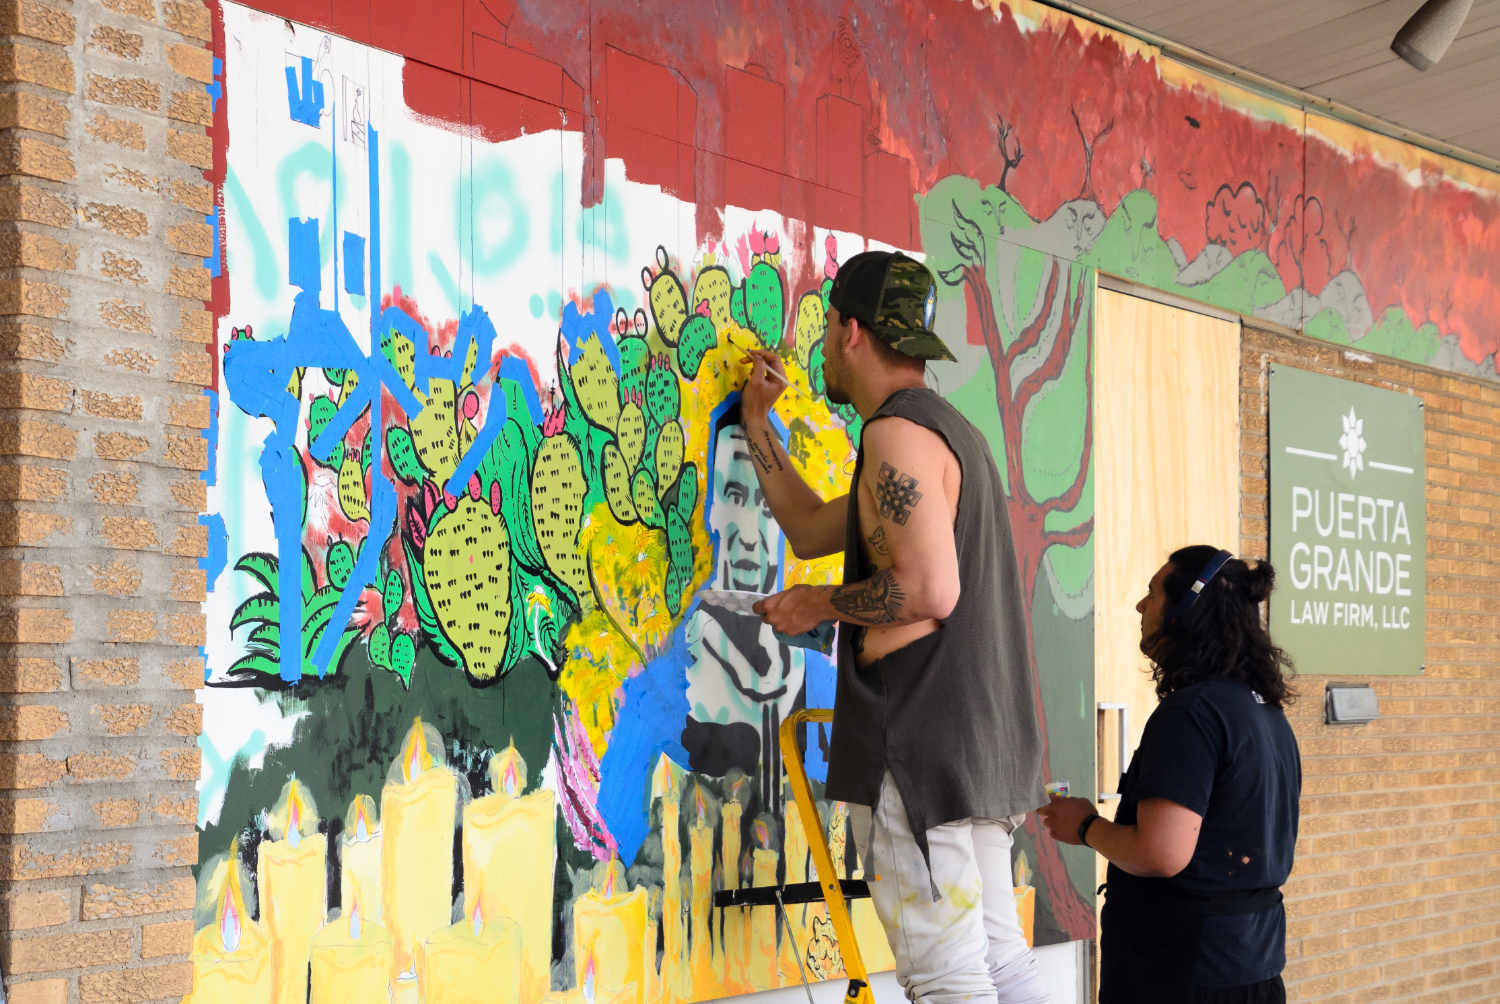 Man with tattooed arms and baseball cap painting a mural on a brick wall with another man beside him